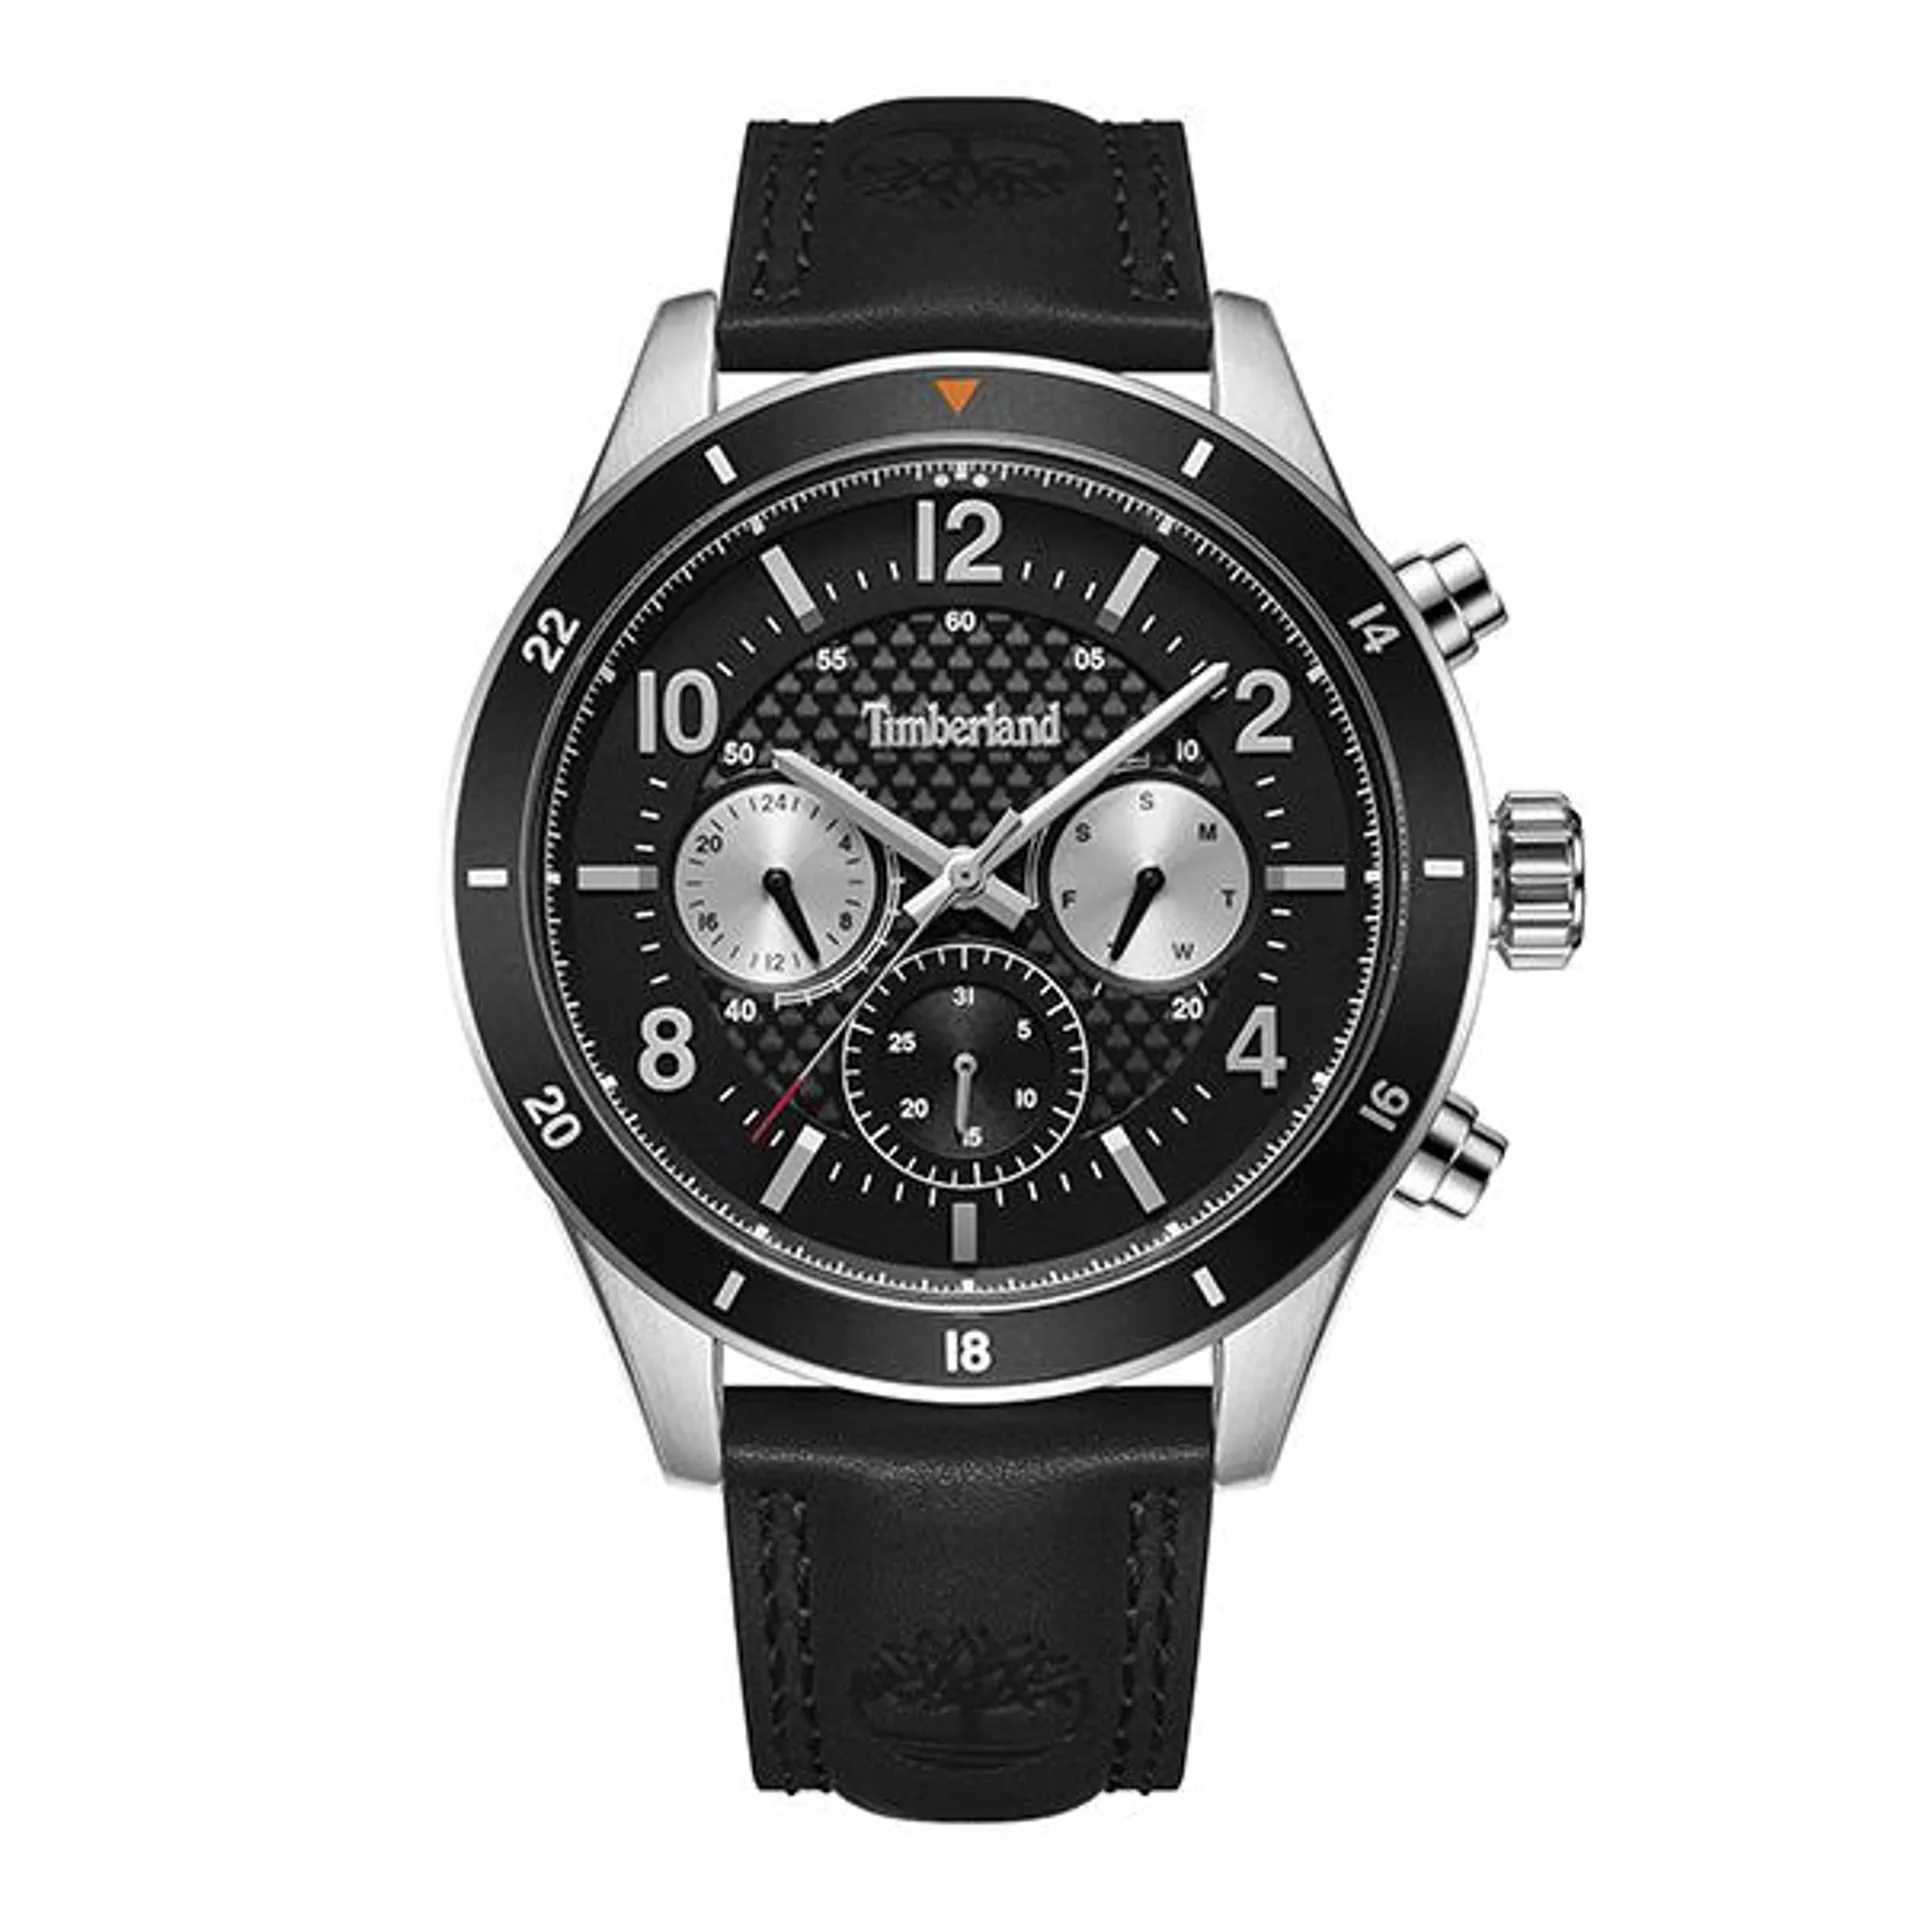 Timberland Gents Hooksett Multifunction Watch with Leather Strap